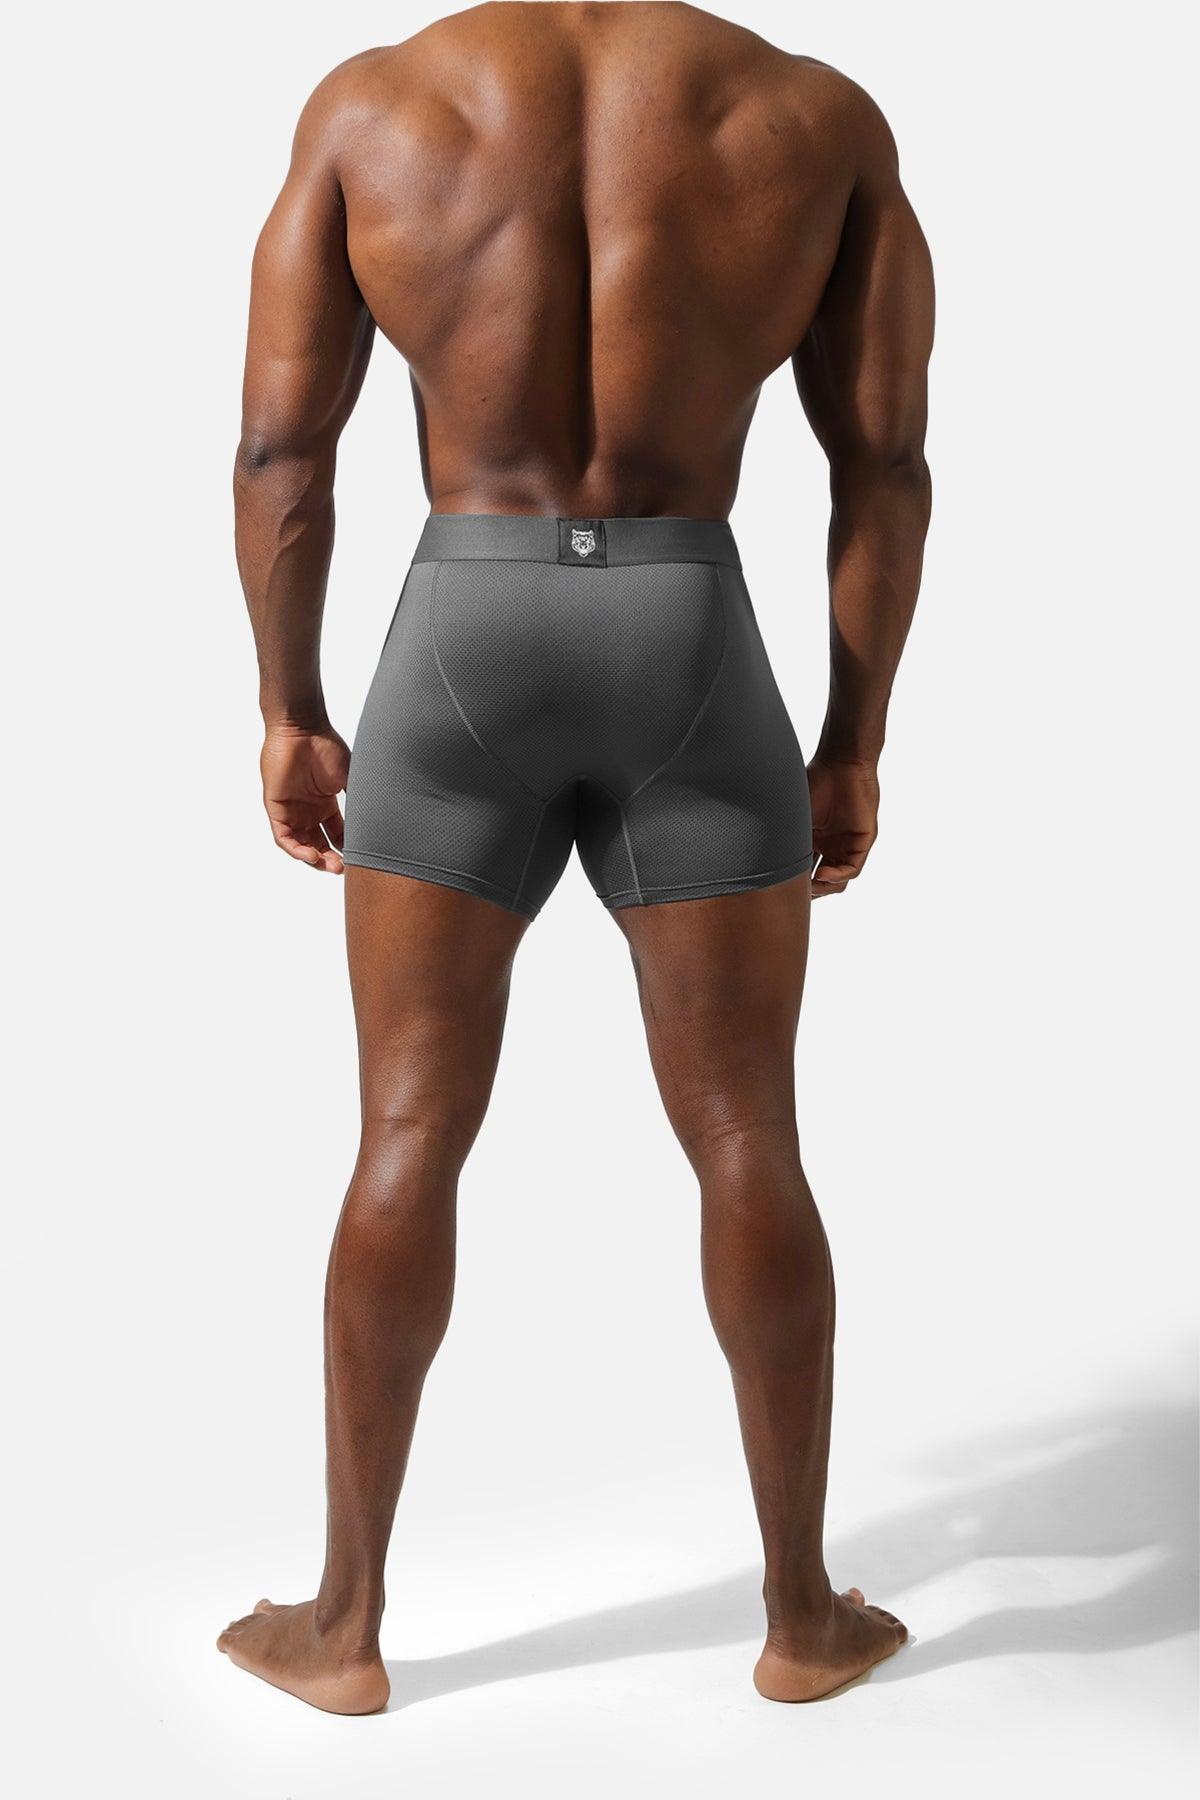 Men's Full Mesh Boxer Briefs 2 Pack - Black and Gray - Jed North